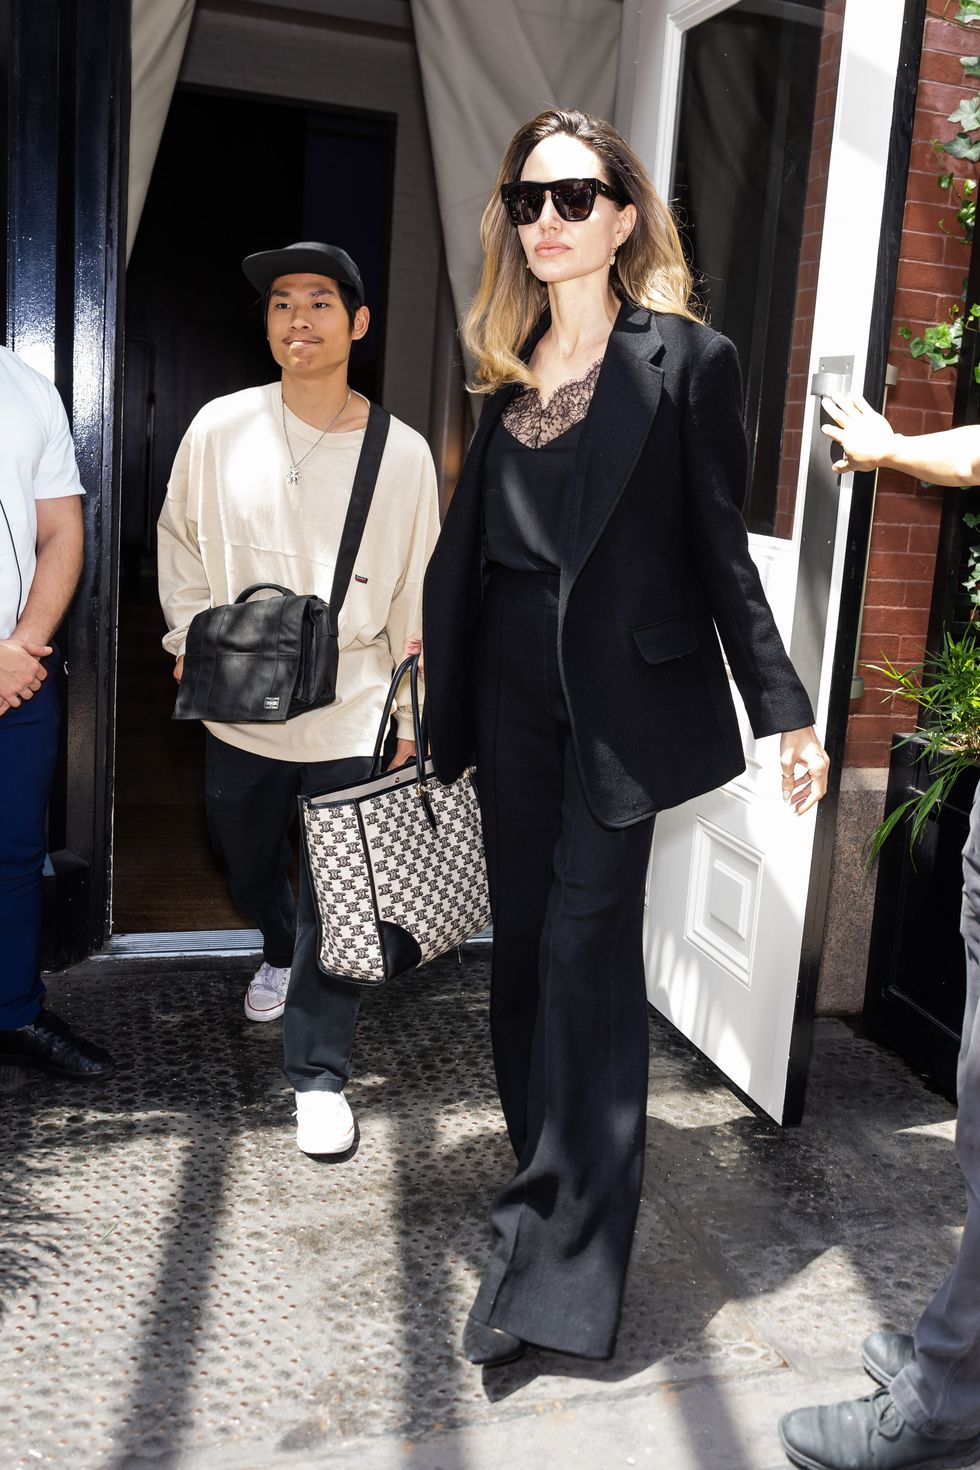 Angelina Jolie Is Chic in a Black Lacy Top While Out With Son Pax